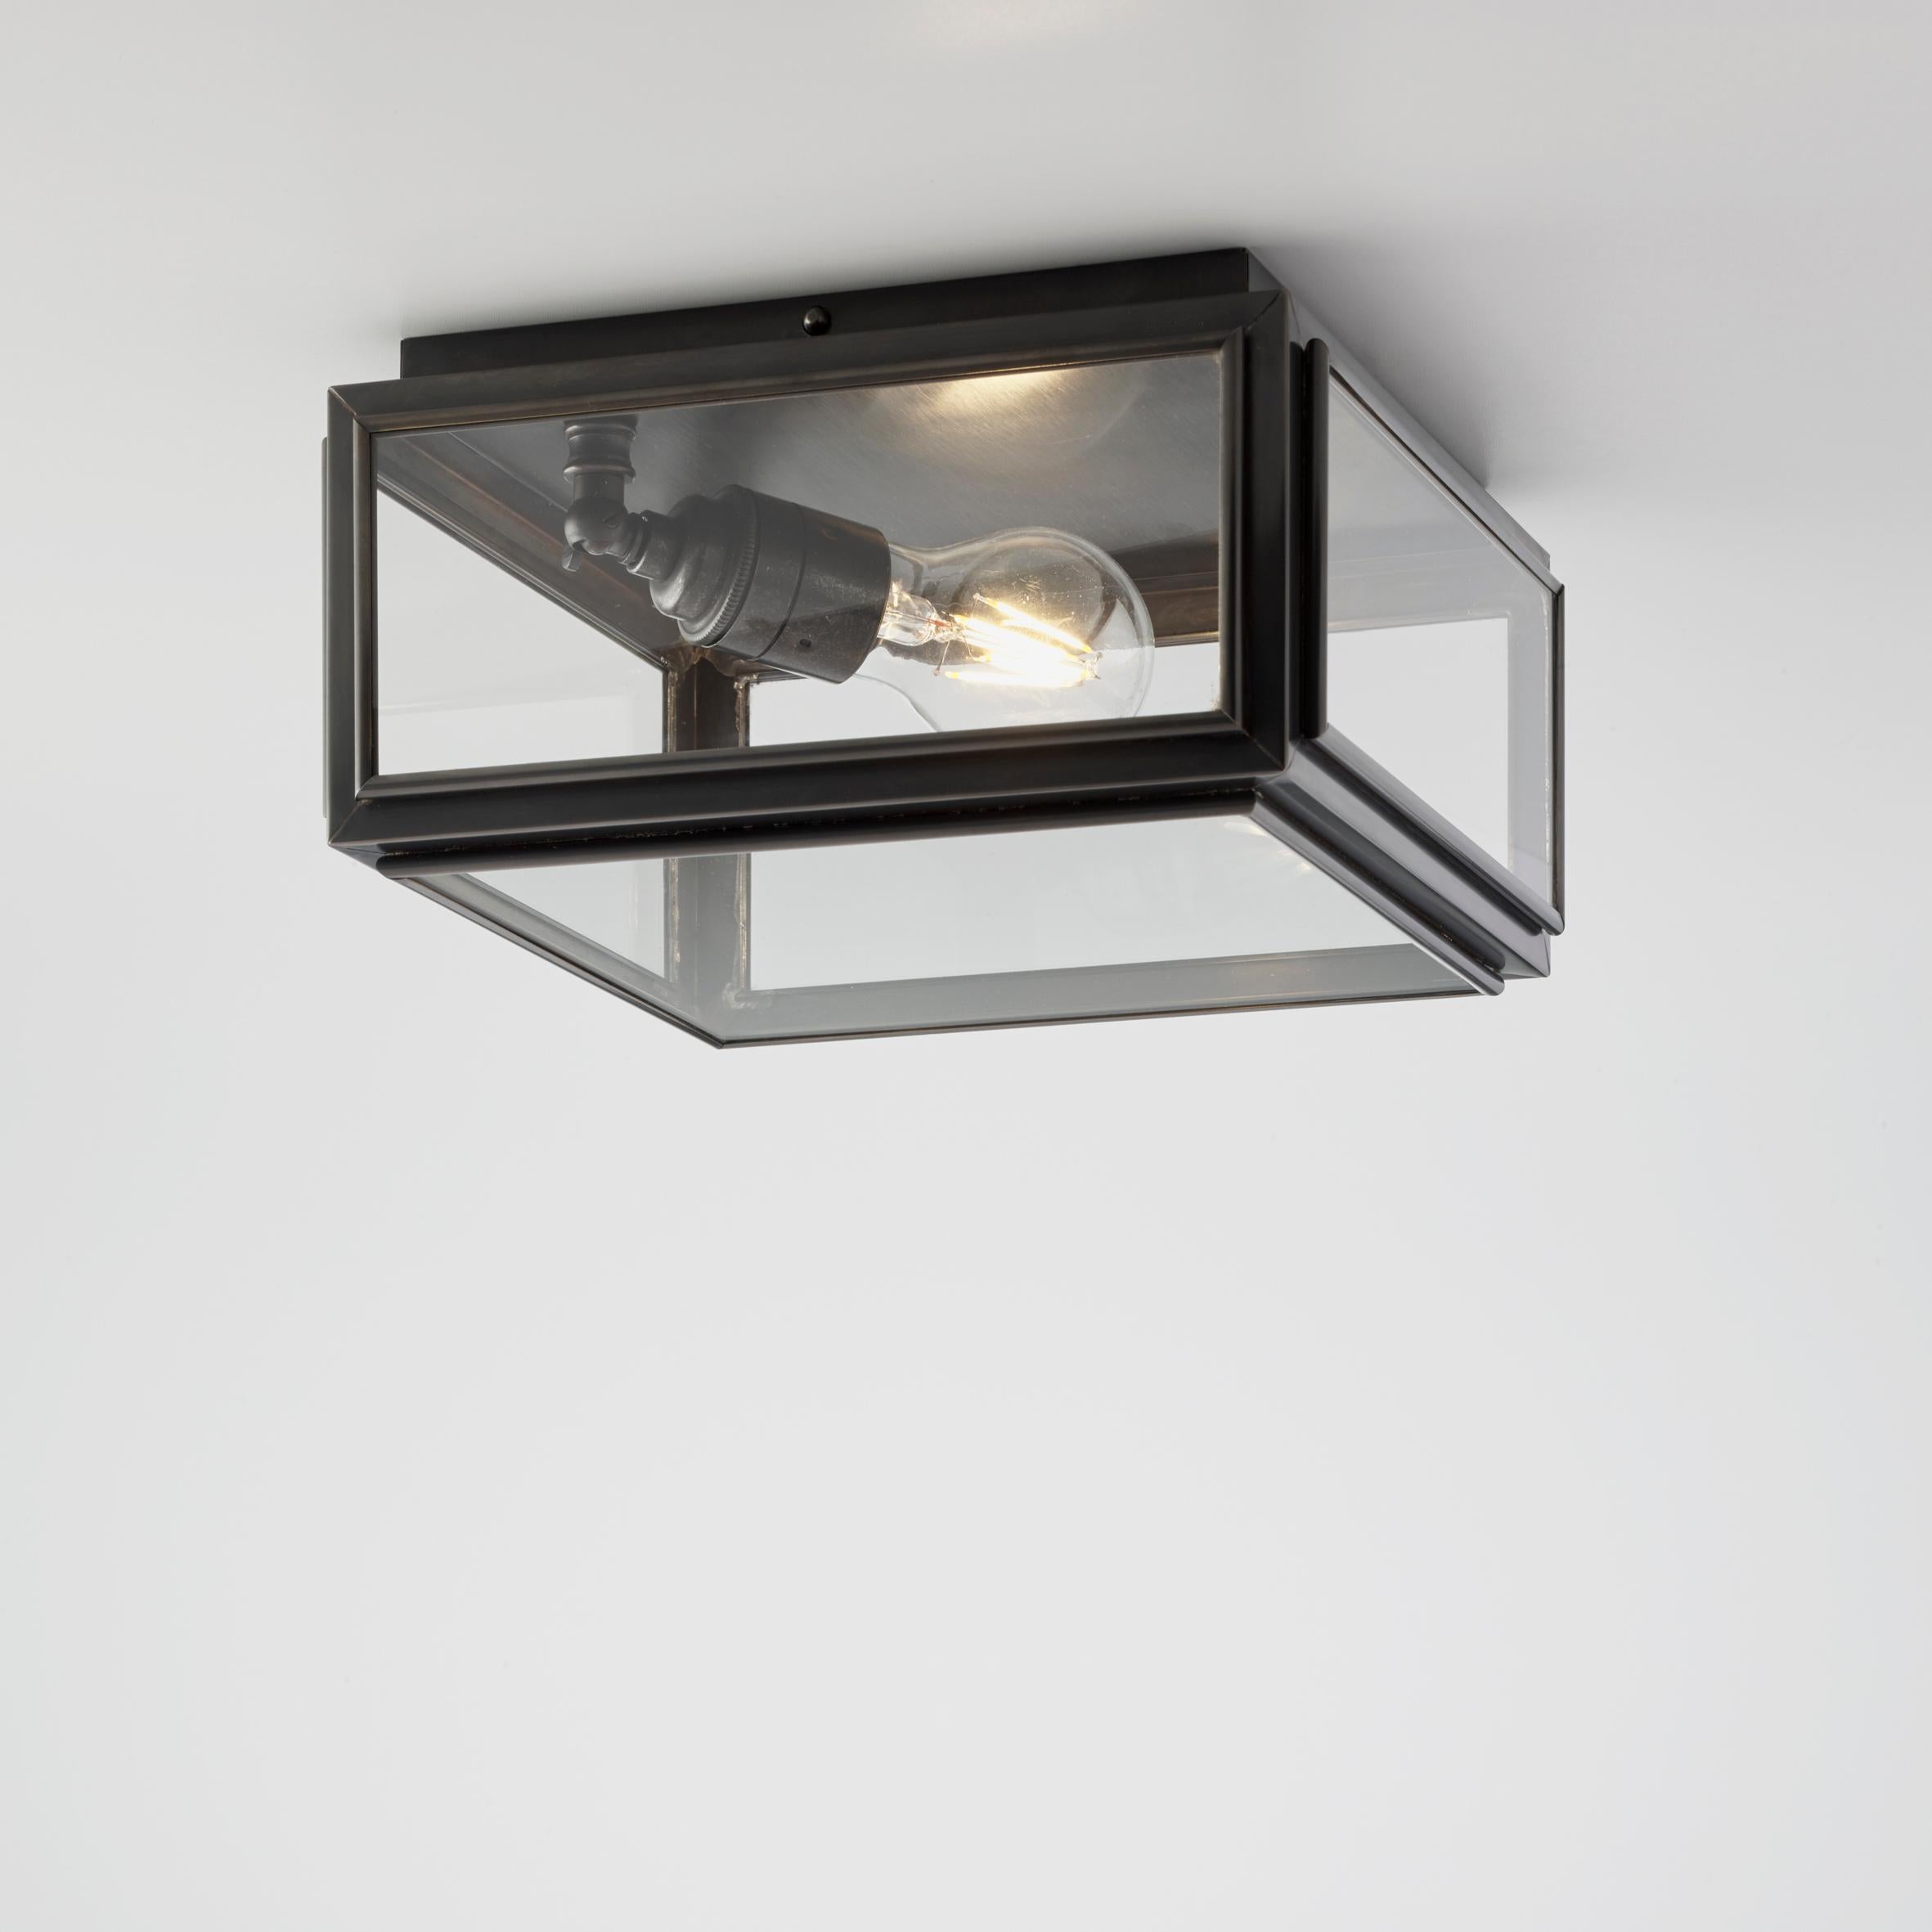 Tekna Chelsea Small Ceiling Light with Dark Bronze Finish and Frosted Glass